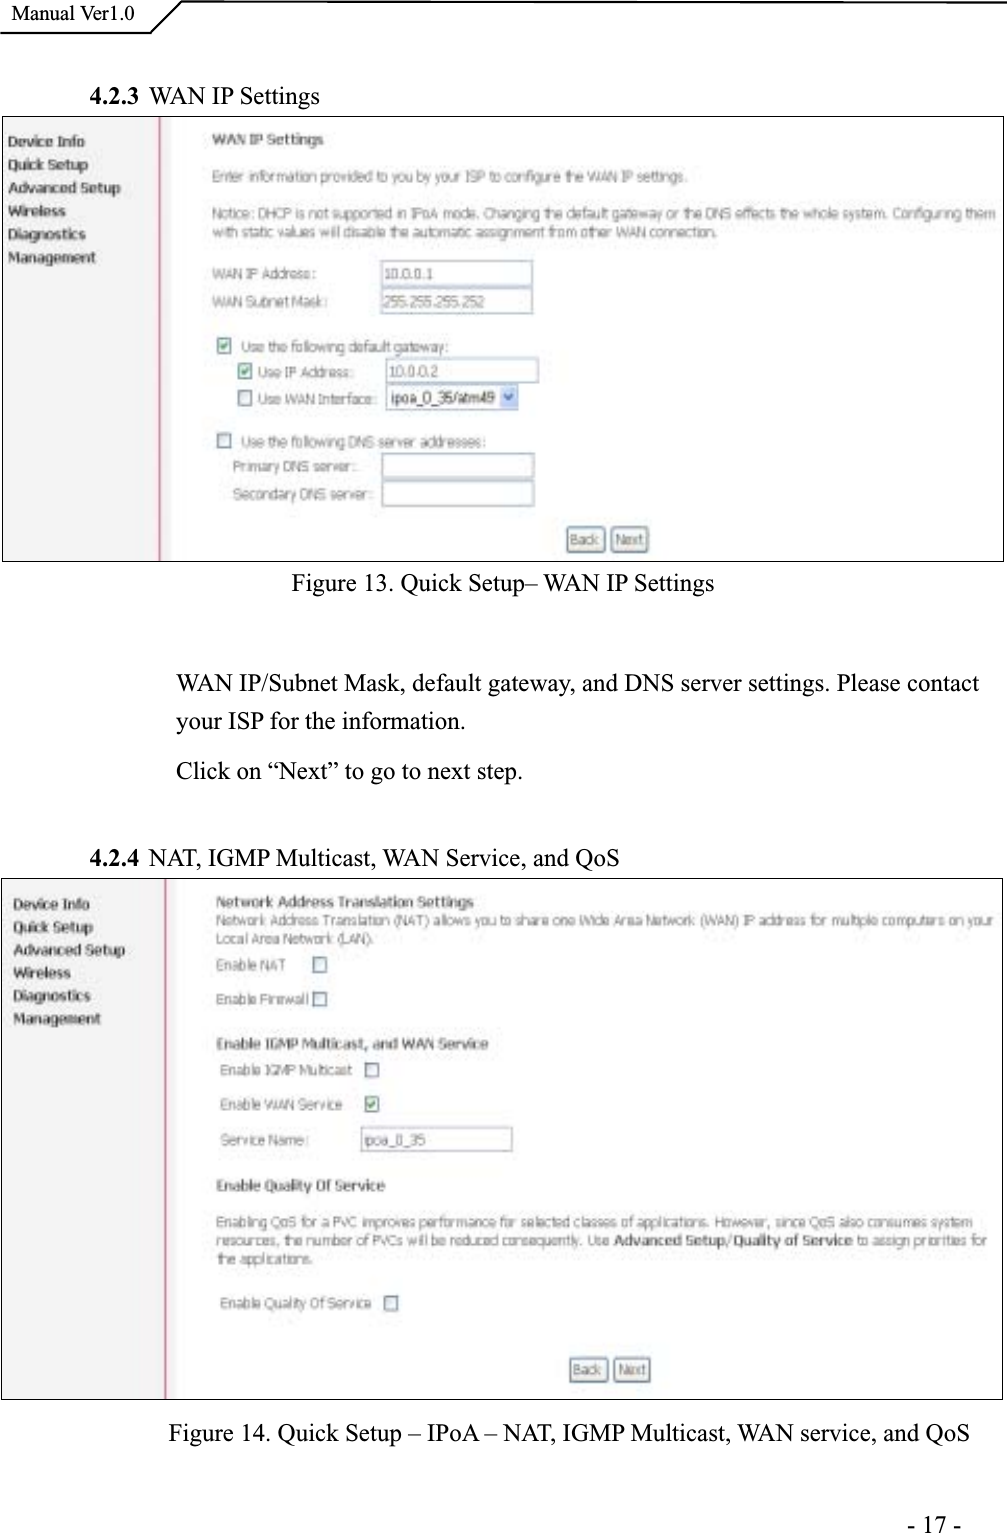  Manual Ver1.04.2.3 WAN IP Settings Figure 13. Quick Setup– WAN IP Settings WAN IP/Subnet Mask, default gateway, and DNS server settings. Please contact your ISP for the information.Click on “Next” to go to next step. 4.2.4 NAT, IGMP Multicast, WAN Service, and QoS Figure 14. Quick Setup – IPoA – NAT, IGMP Multicast, WAN service, and QoS                                                                      -17-